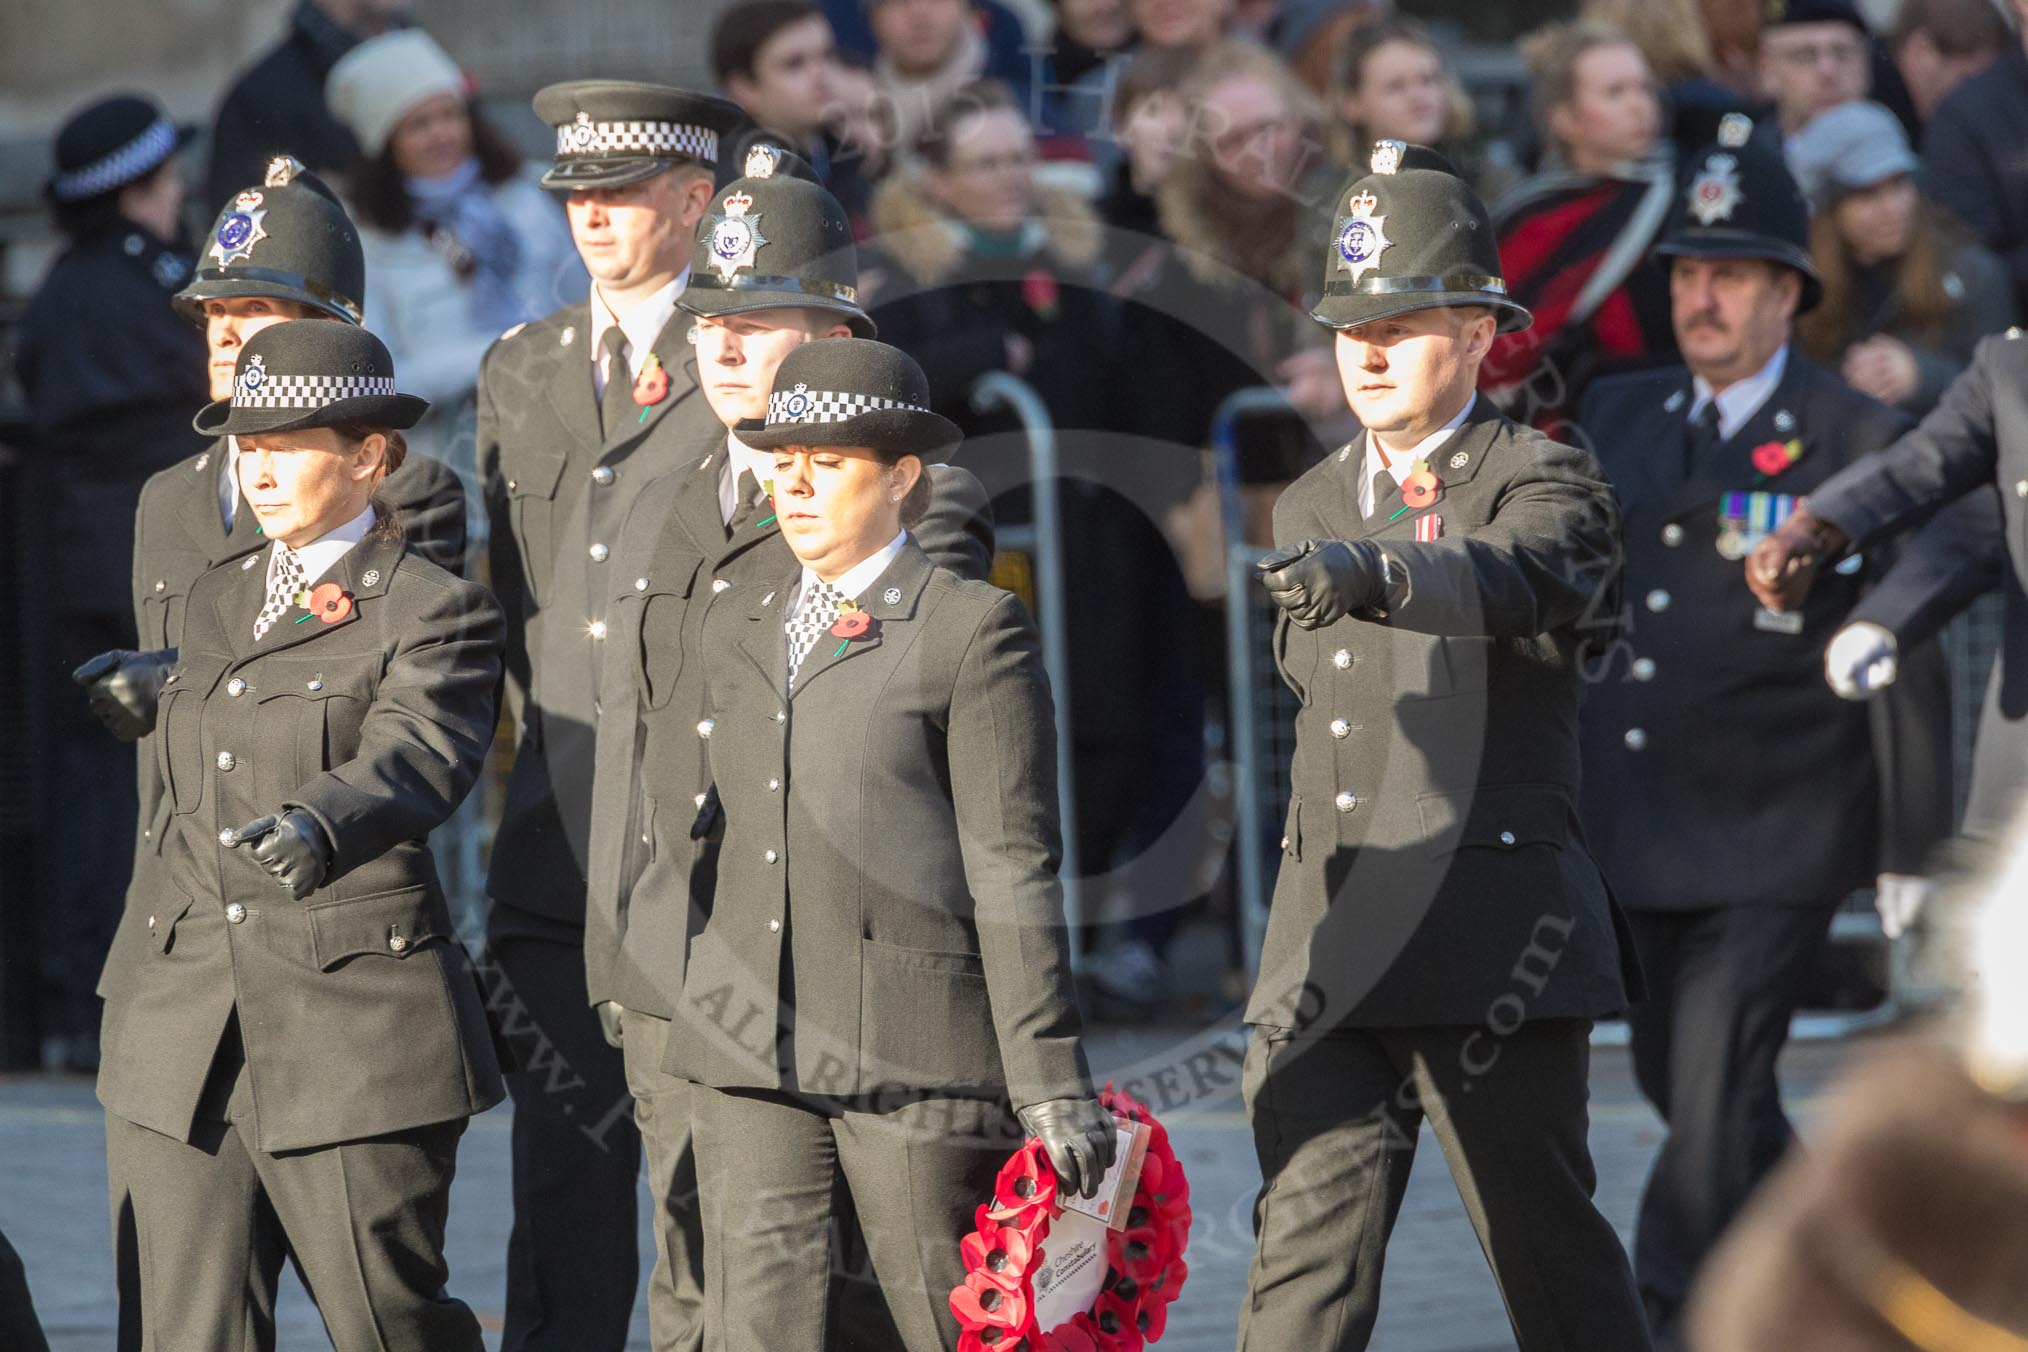 March Past, Remembrance Sunday at the Cenotaph 2016: M38 Cheshire Special Constabulary.
Cenotaph, Whitehall, London SW1,
London,
Greater London,
United Kingdom,
on 13 November 2016 at 13:19, image #2920